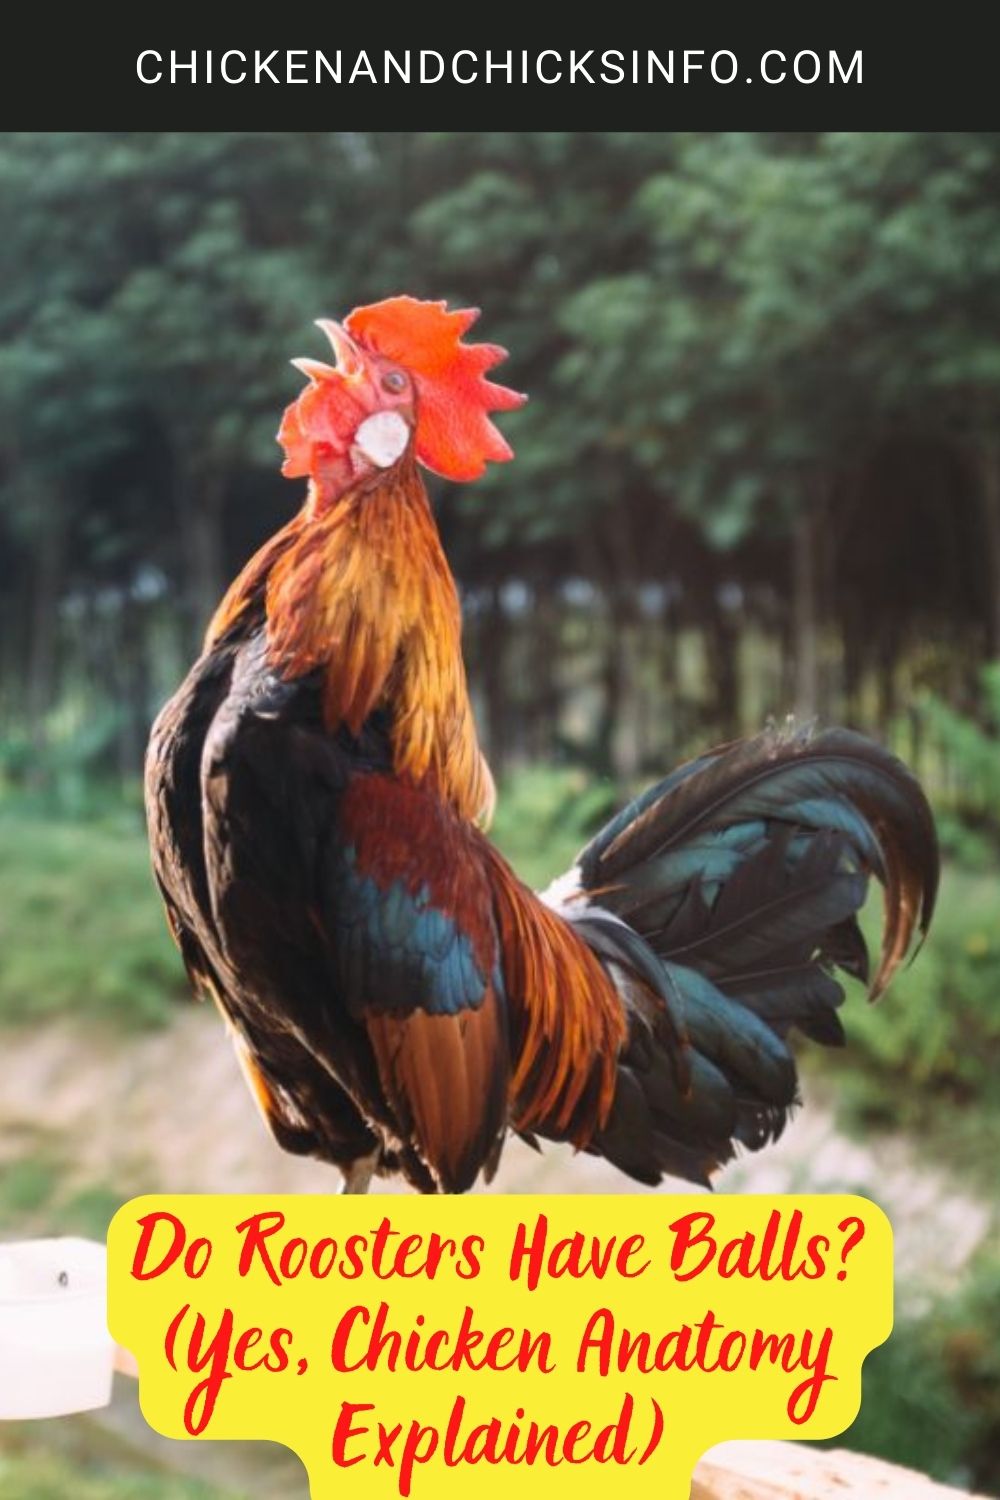 Do Roosters Have Balls? (Yes, Chicken Anatomy Explained) poster.